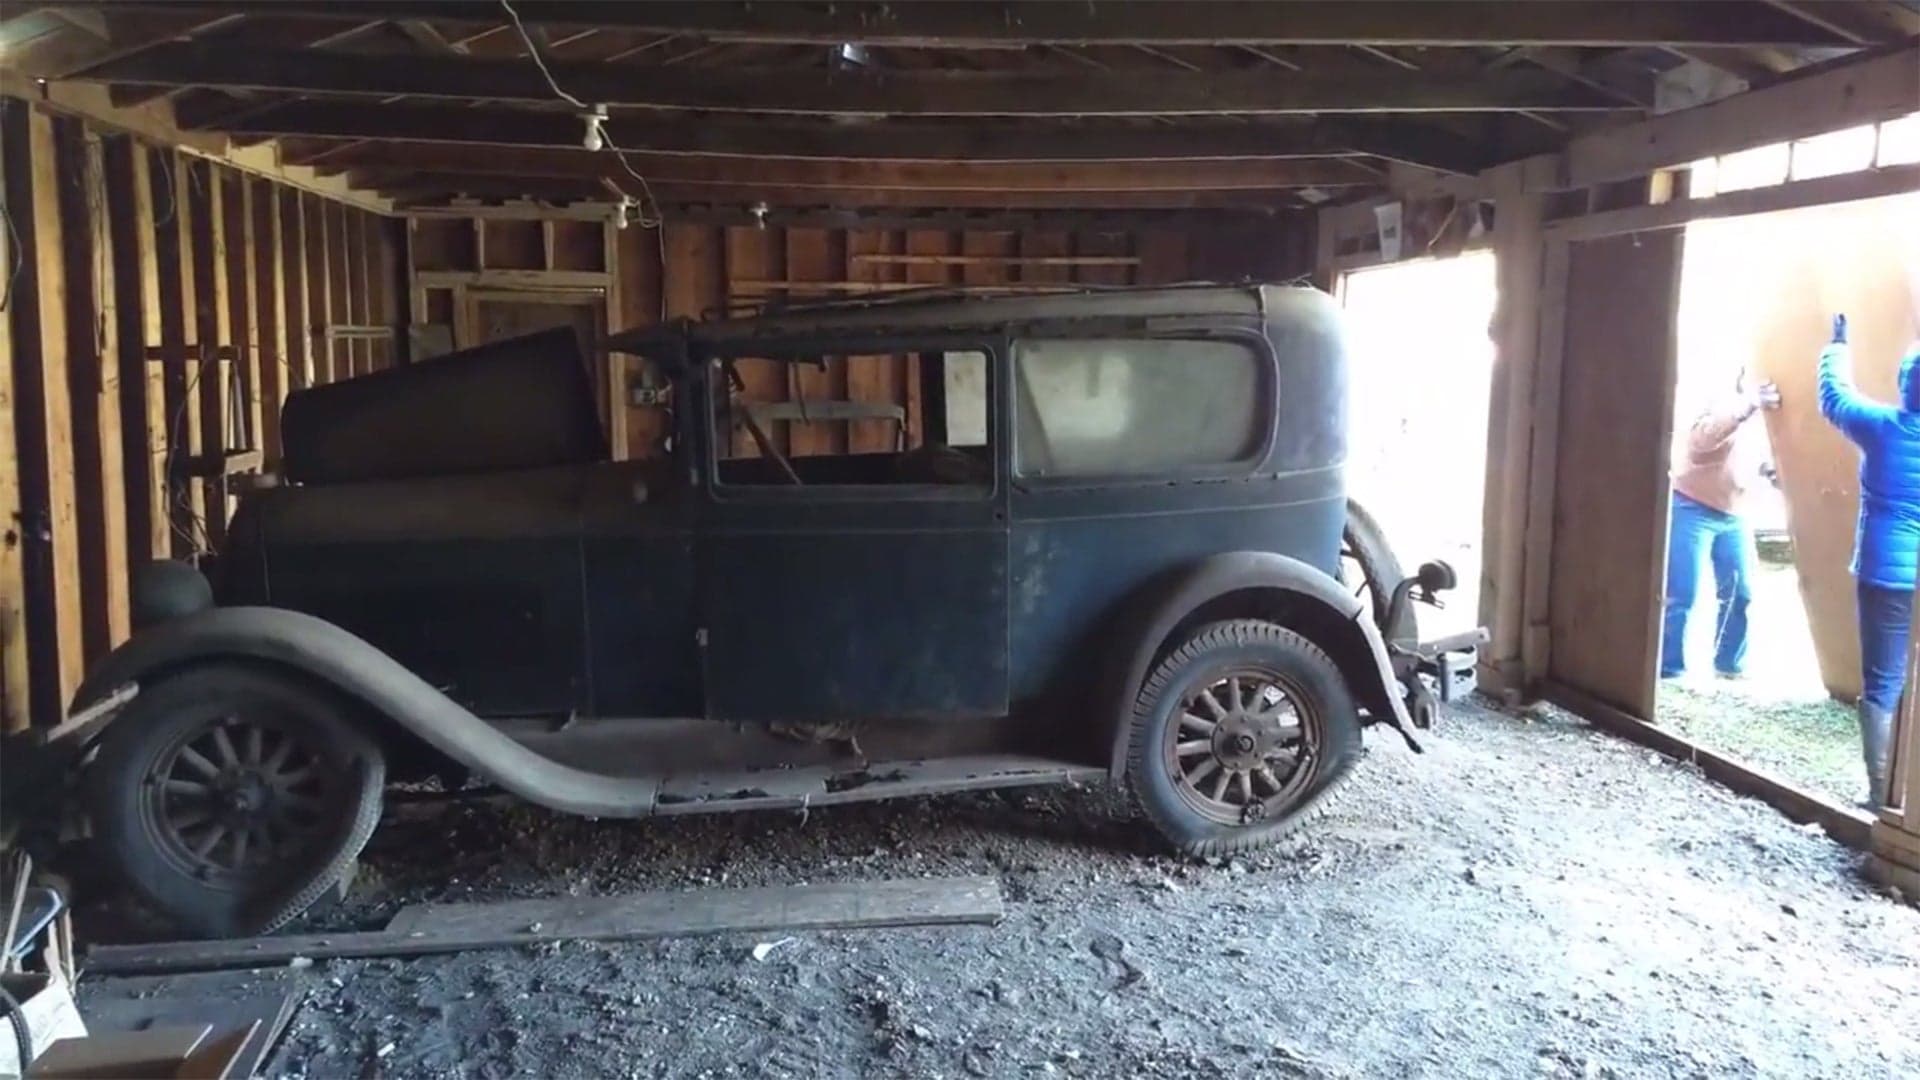 Rare, Last-of-its-Kind 1927 Marmon Automobile Rescued From Illinois Garage After Fifty Years